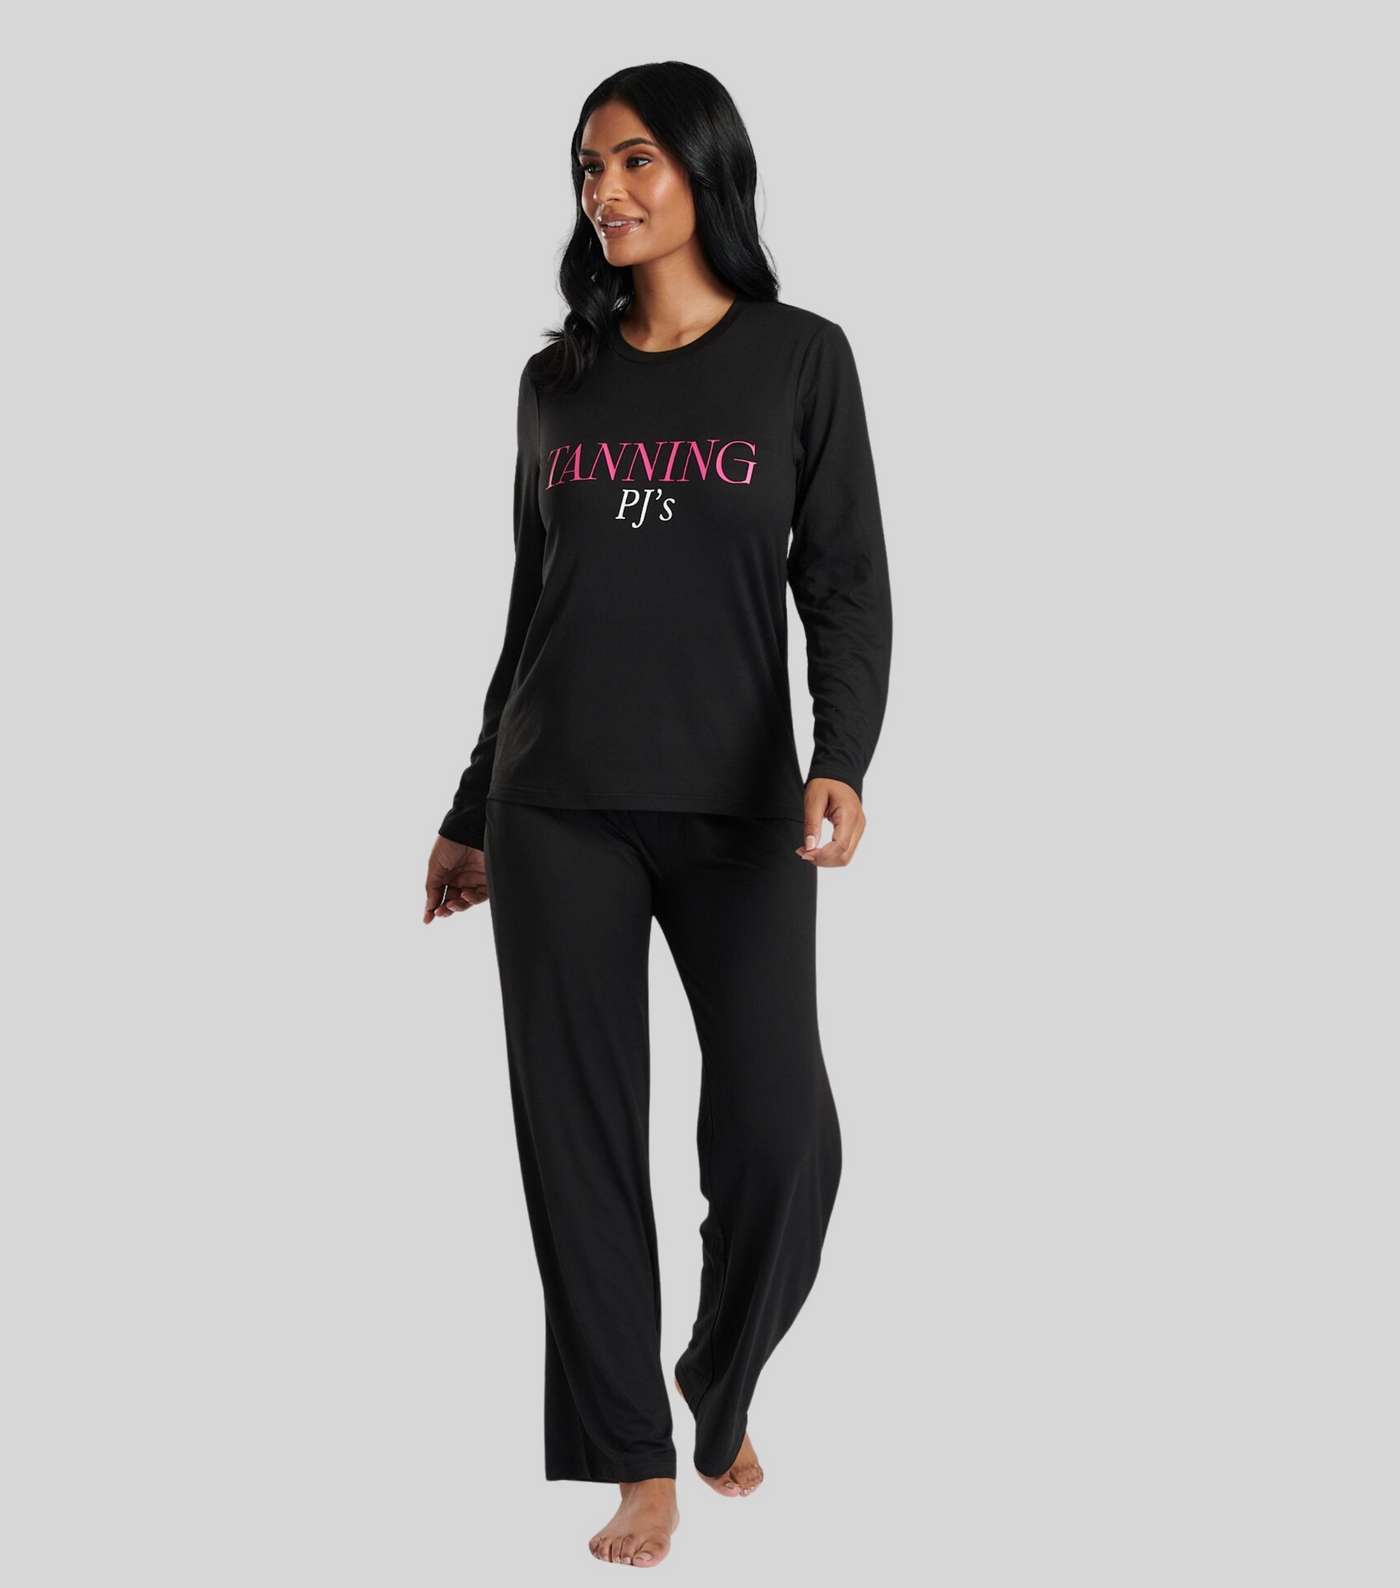 Loungeable Black Trouser Pyjama Set with Tanning PJs Logo Image 4